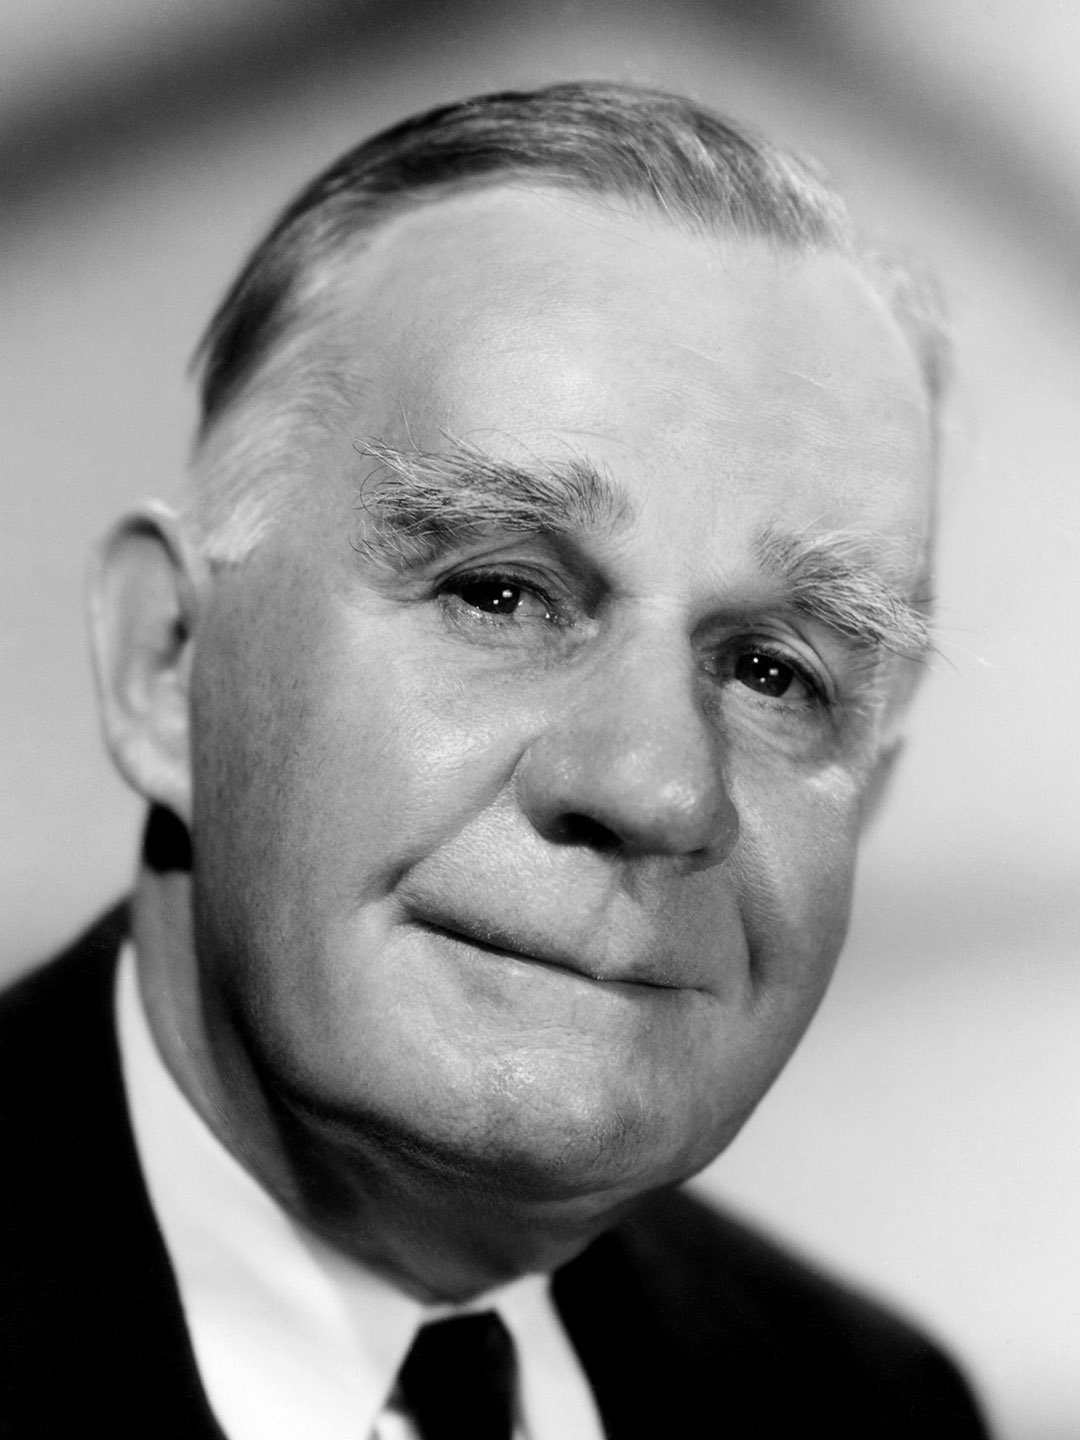 How tall is Henry Travers?